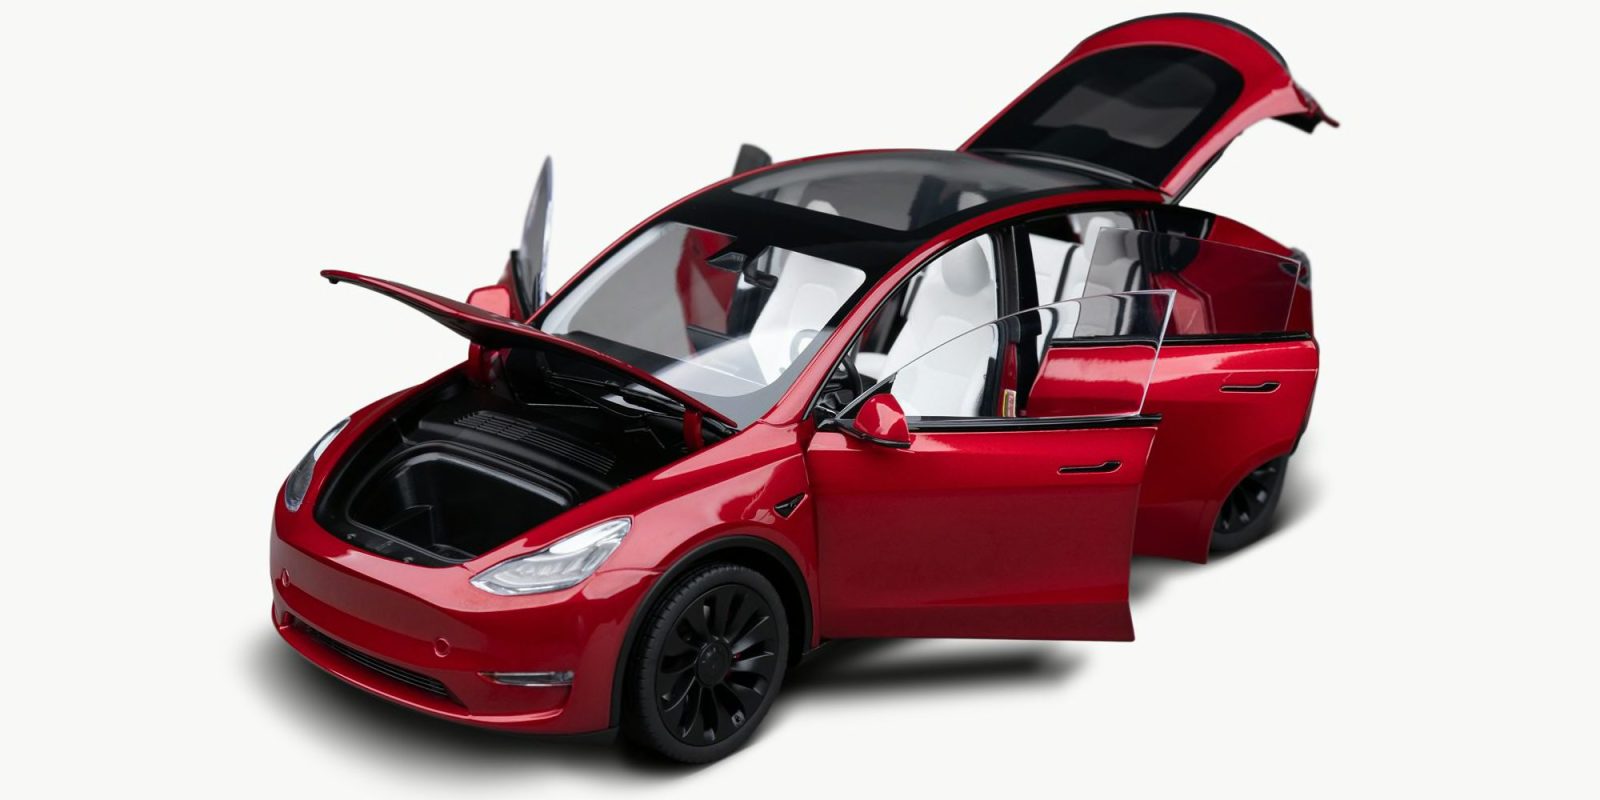 Tesla's cheapest Model Y ever is this 1:18 diecast model for